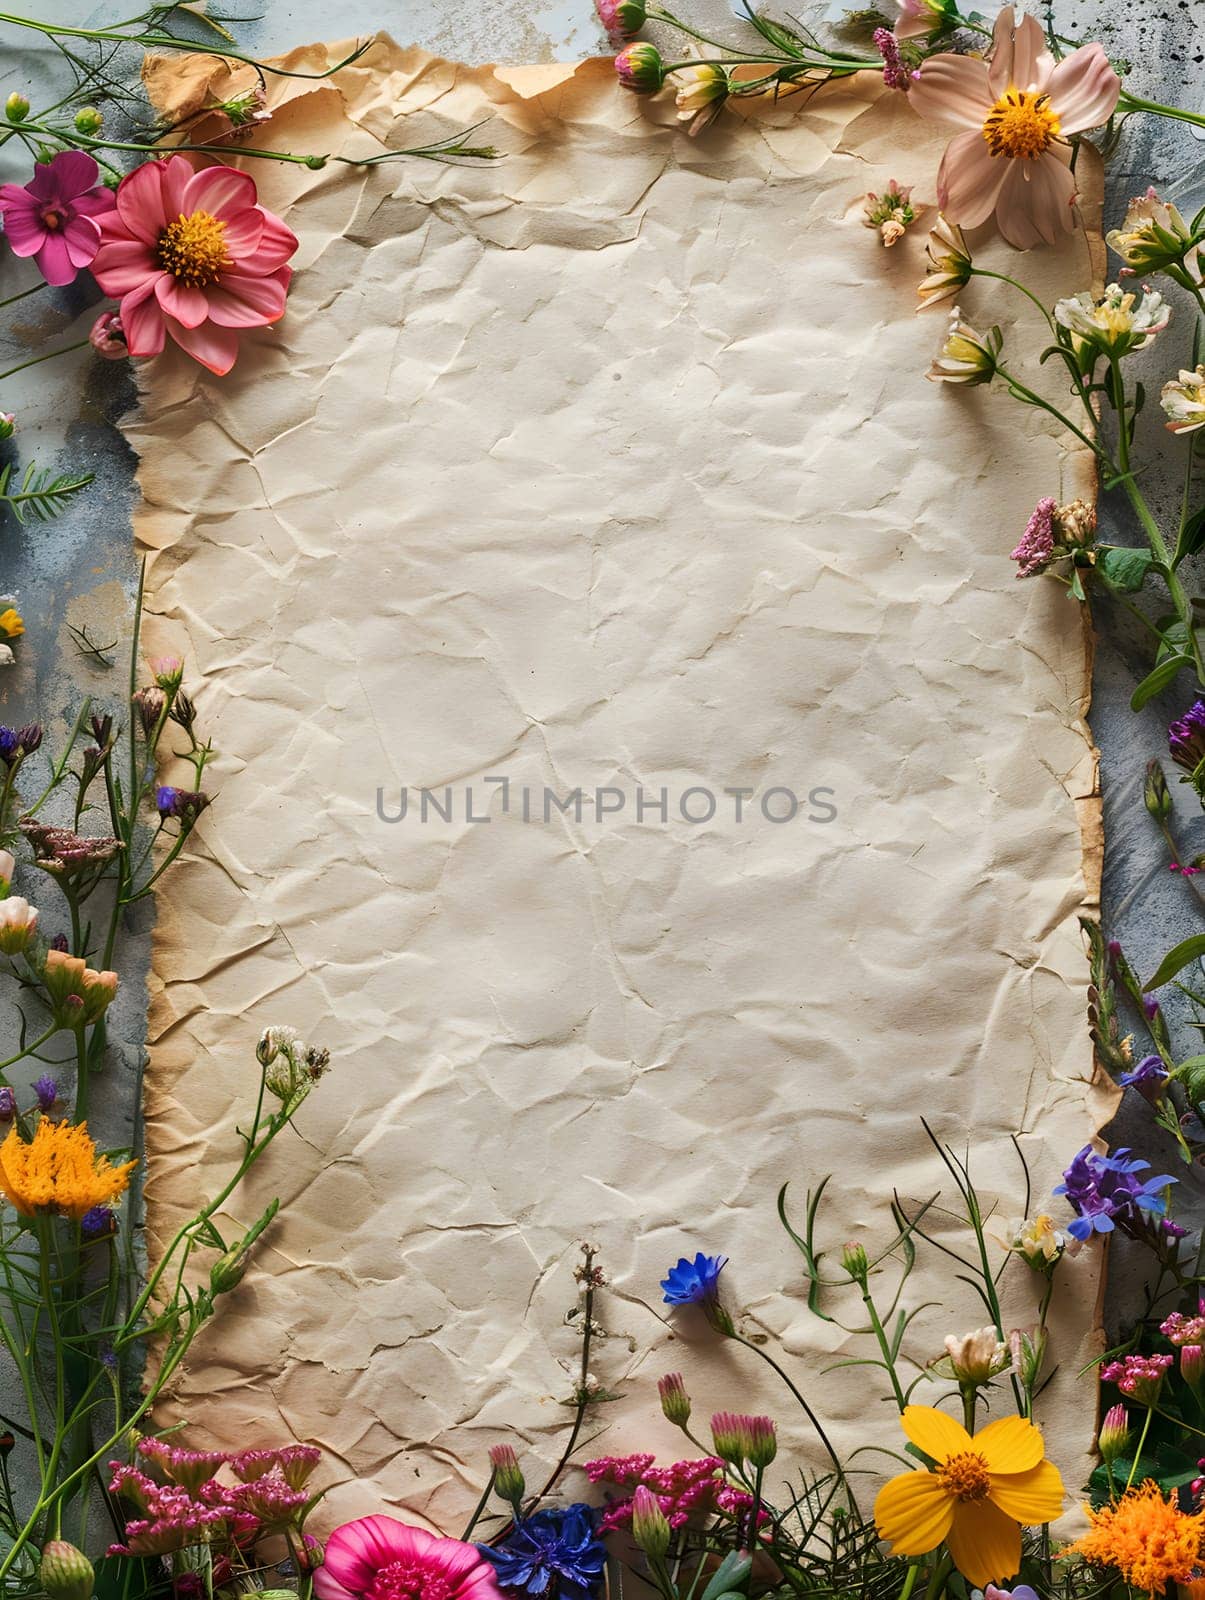 A piece of paper is adorned with botanical elements flowers, petals, and vegetation. It sits on a table as part of a floral arrangement, enhancing the landscape with its groundcover